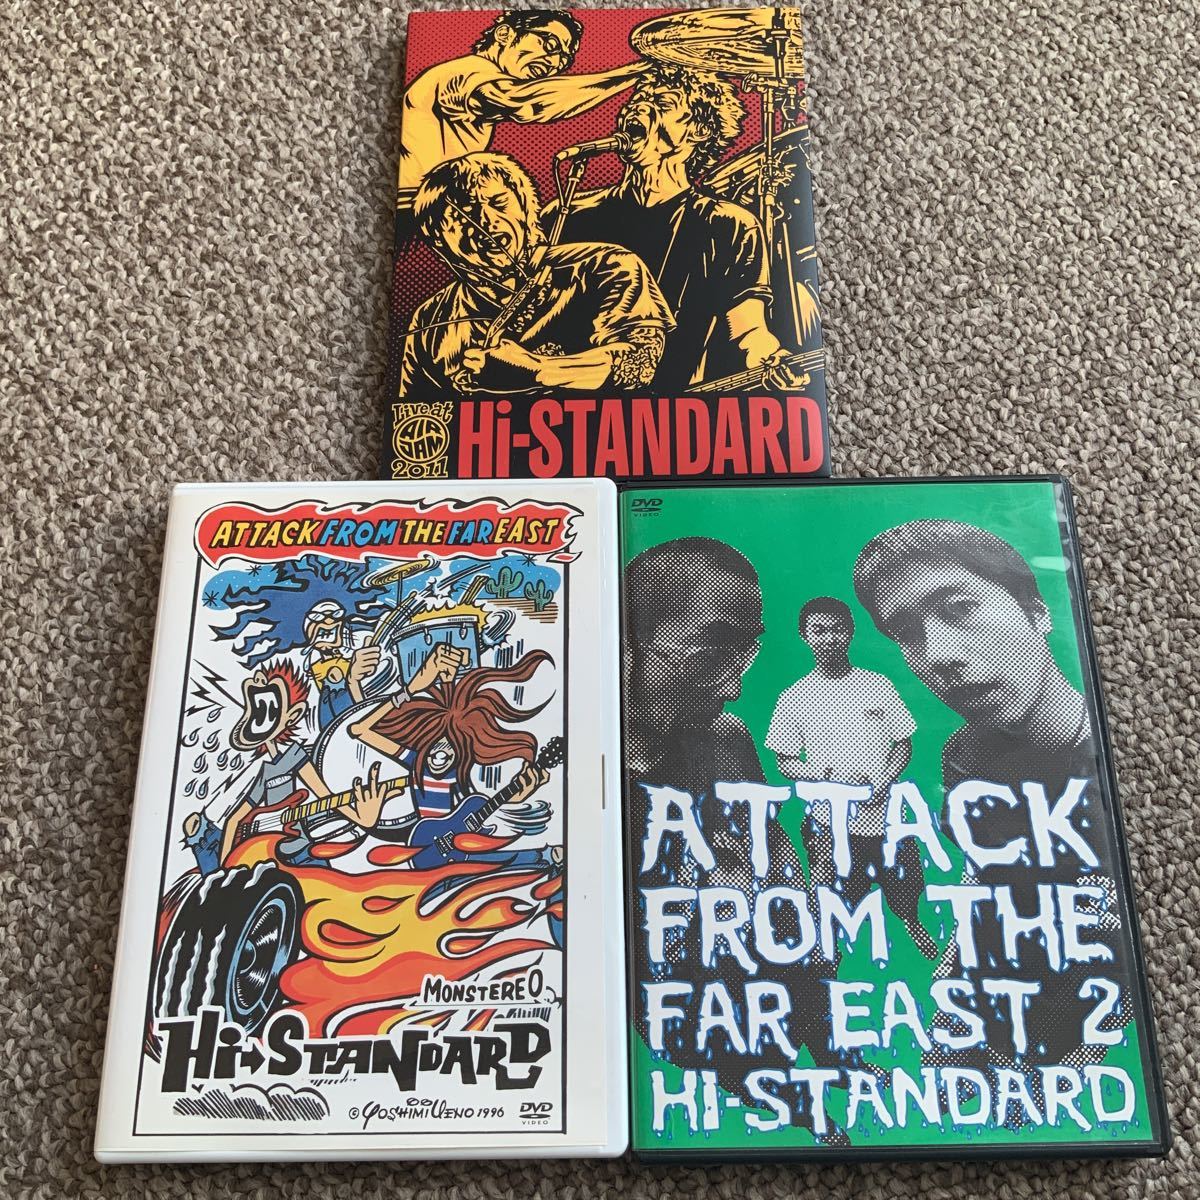 ATTACK FROM THE FAR EAST II Hi-STANDARD ポスター（73-41ｃｍ） Hi-STANDARD/ATTACK  FROM THE FAR EAST